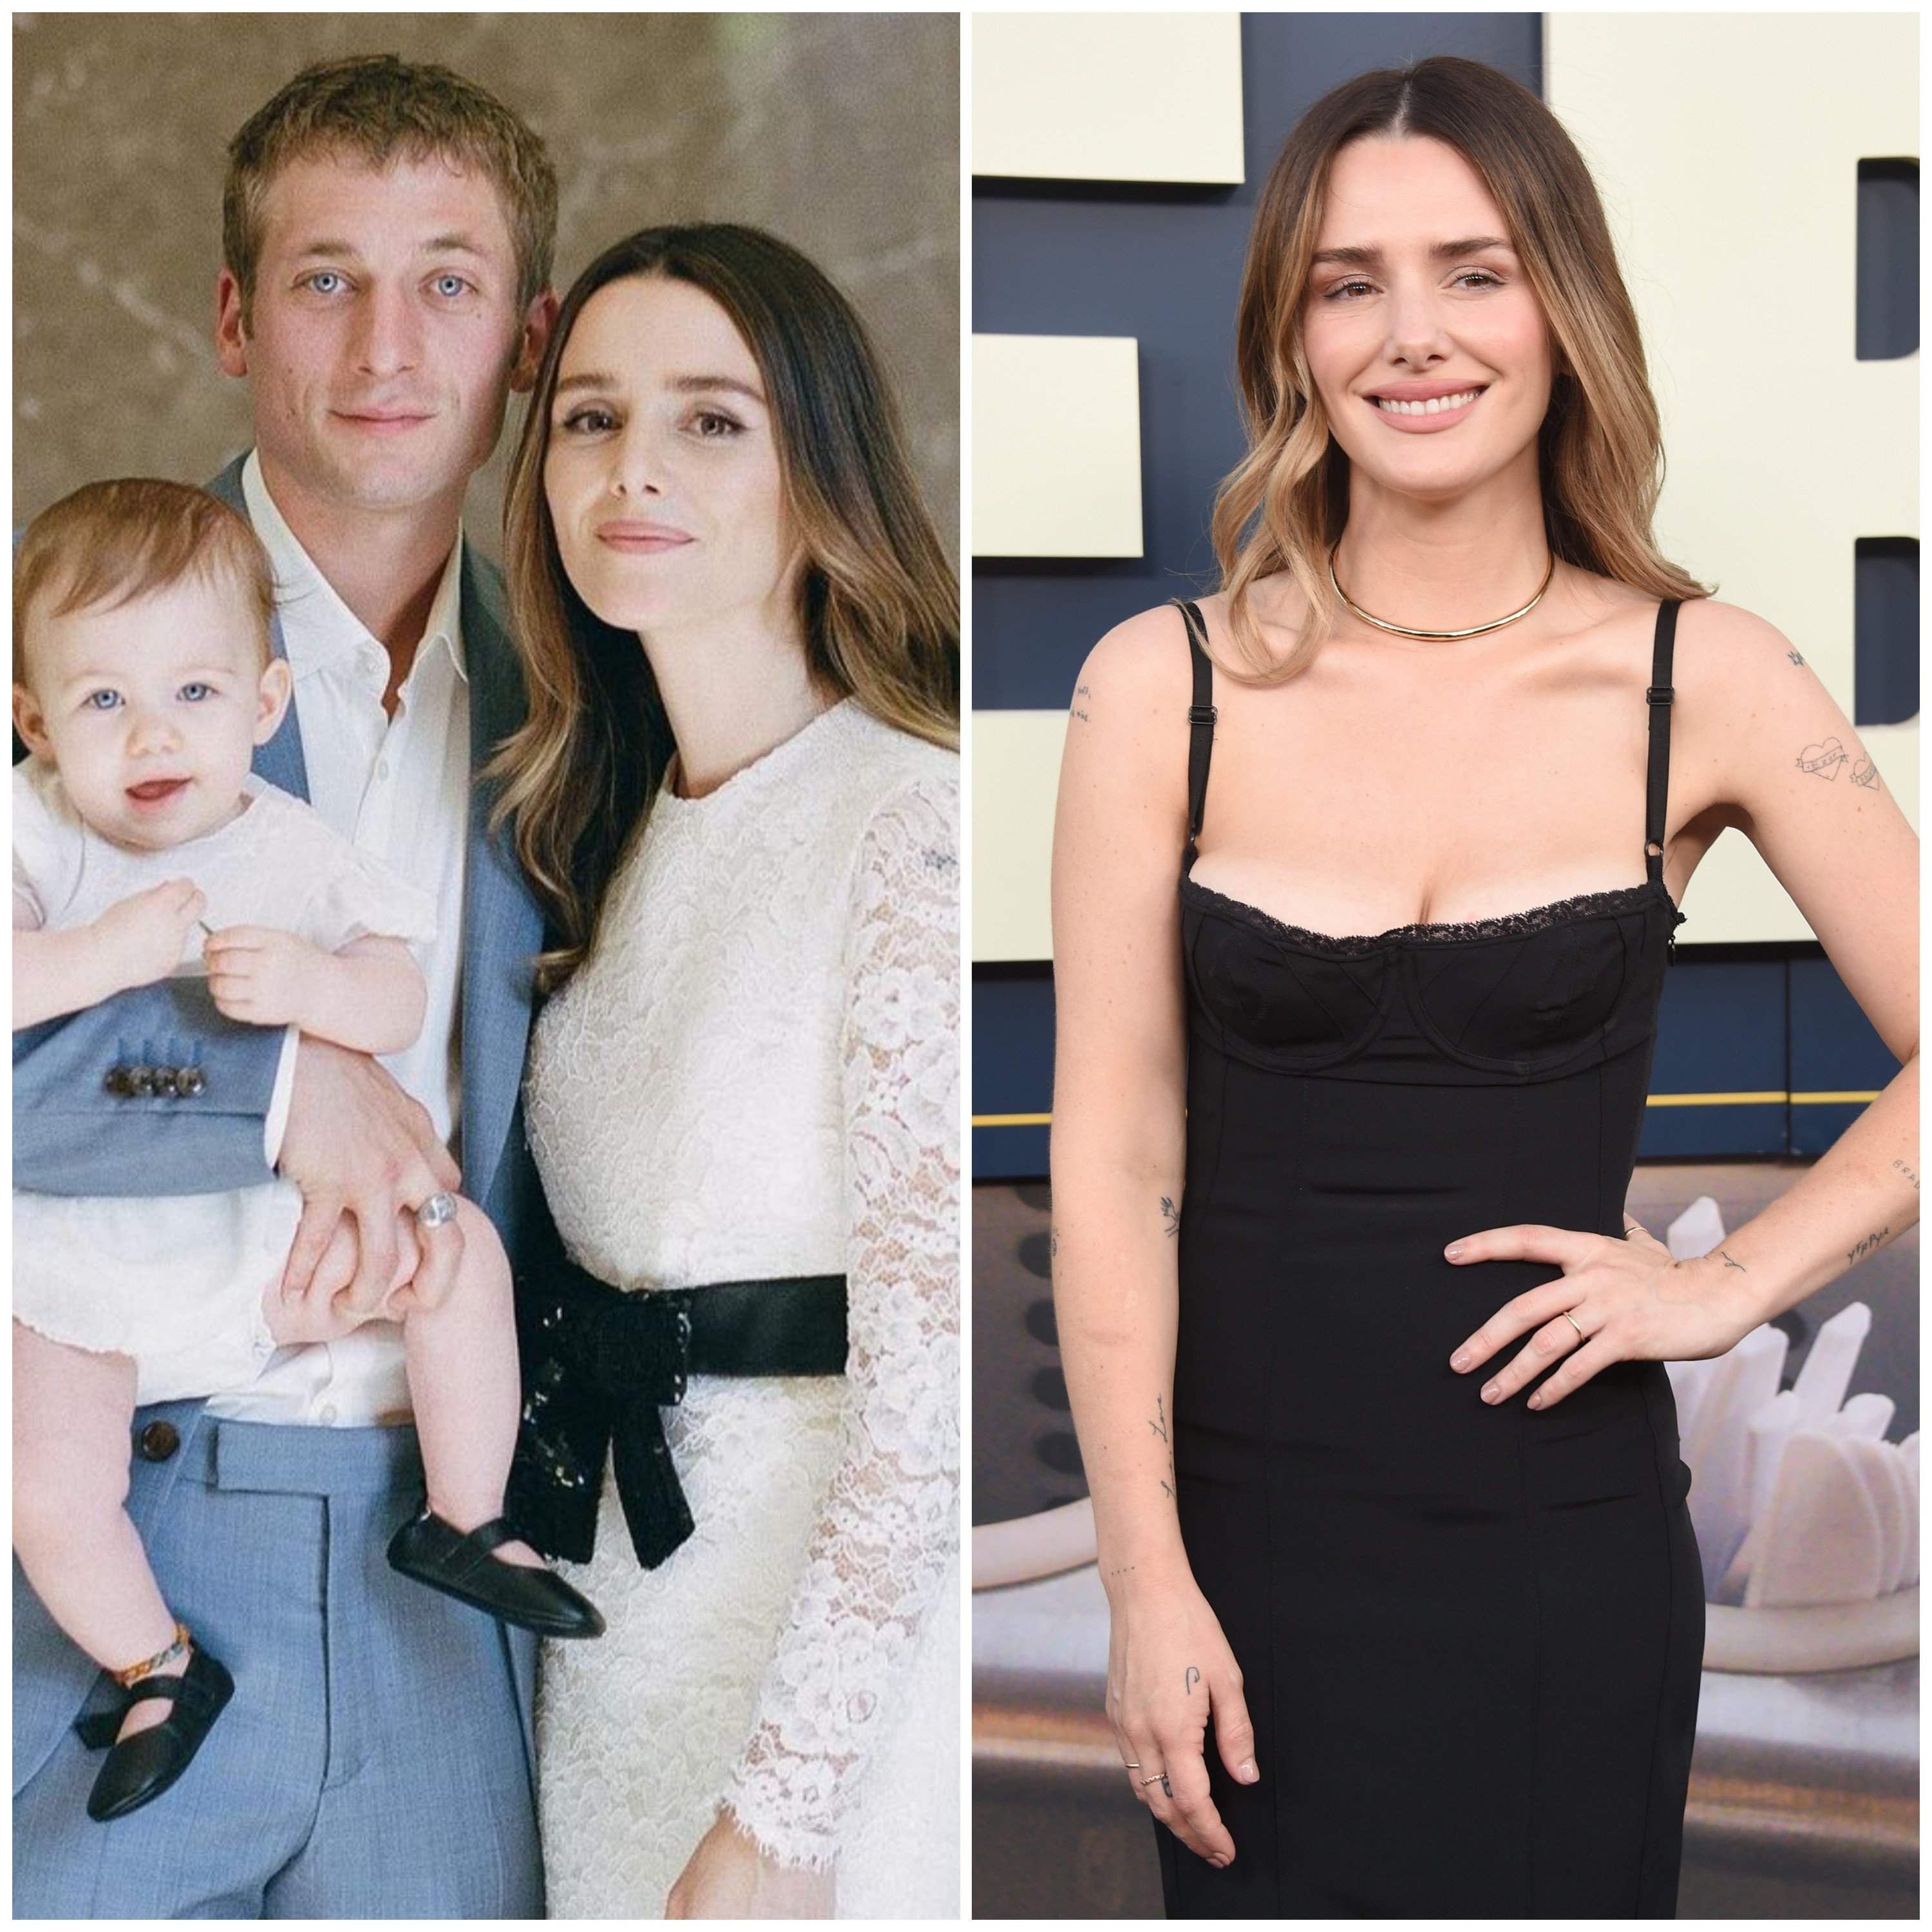 The Bear’s Jeremy Allen White was married to Addison Timlin for three years prior to their split last May. Photos: @addison.timlin/Instagram; FilmMagic